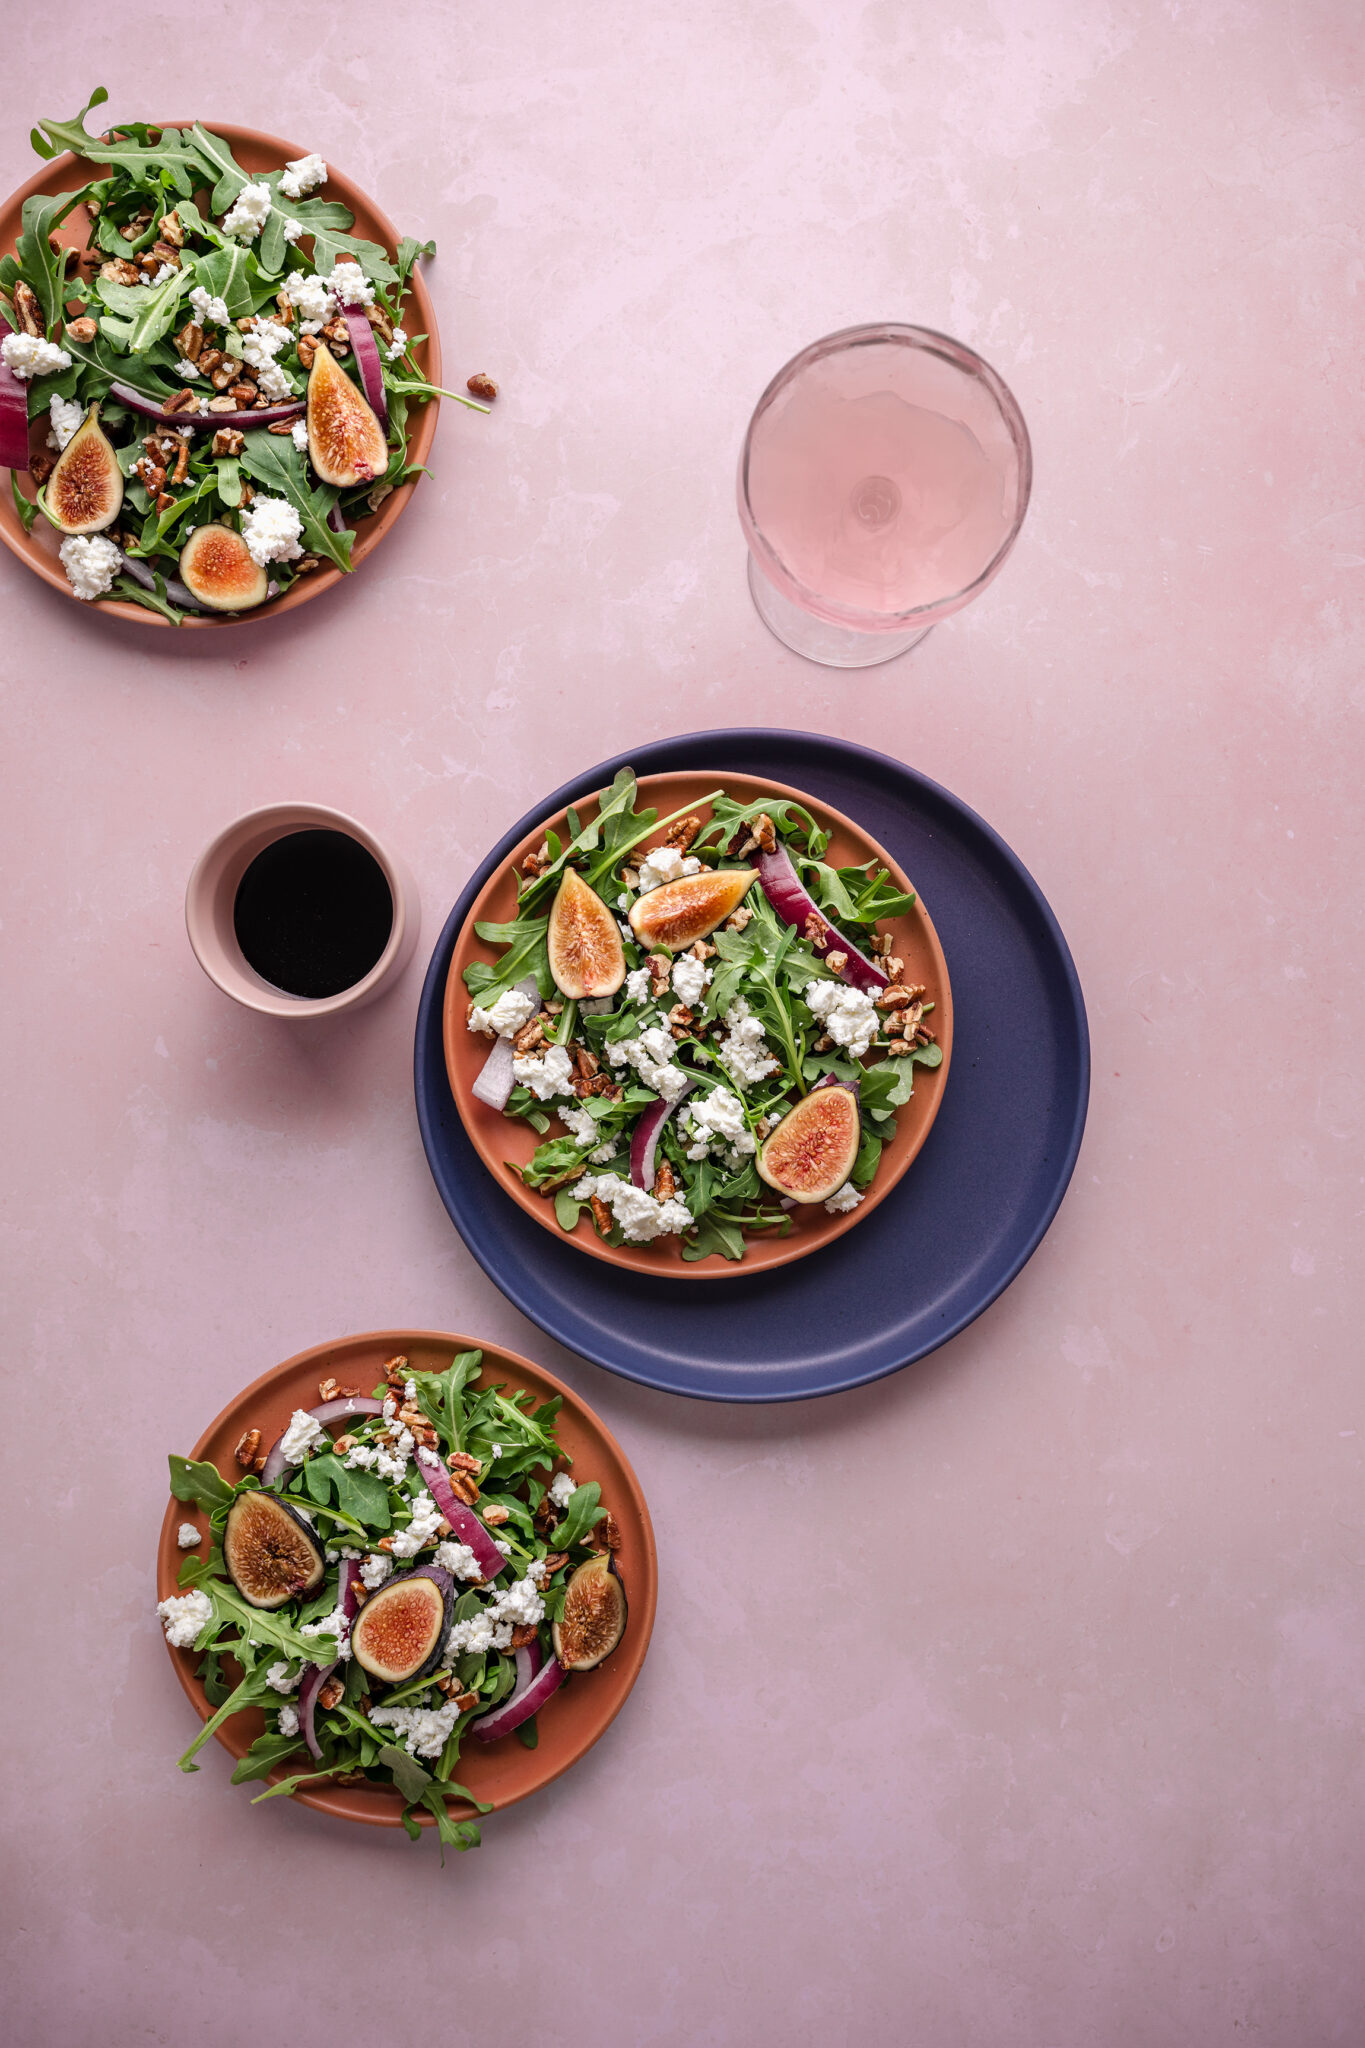 Arugula salad with figs, pecans, red onion and goat cheese on salmon-colored plates; greens and fiber rich fruits support gut health which support hormone balance.